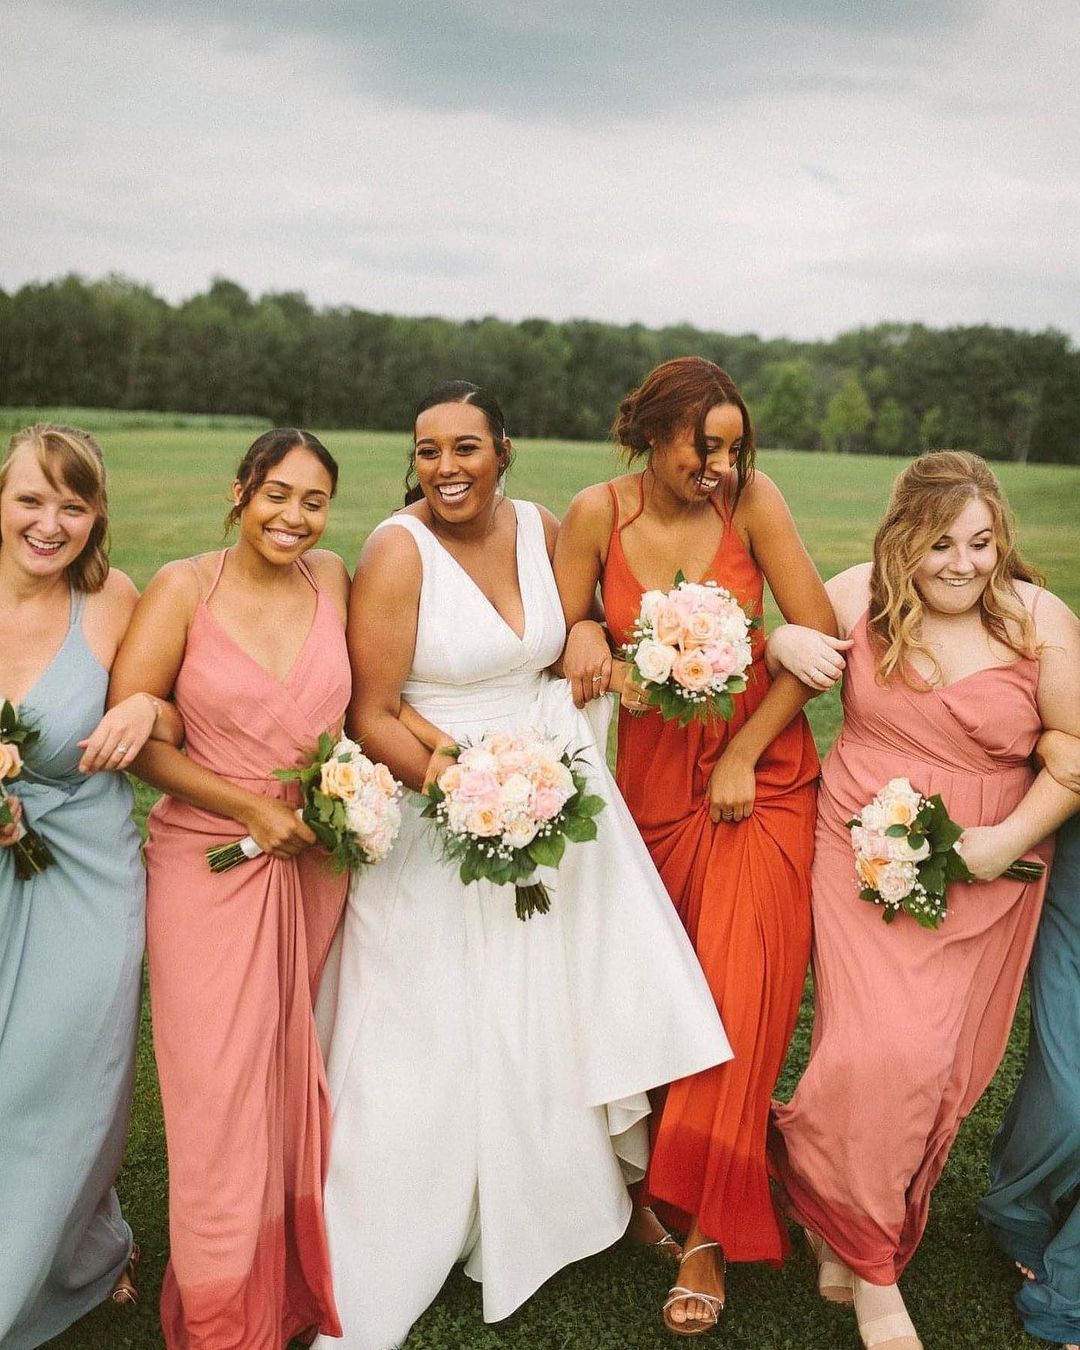 Rustic Wedding Color Palettes for your Bridesmaids - Rustic Wedding Chic